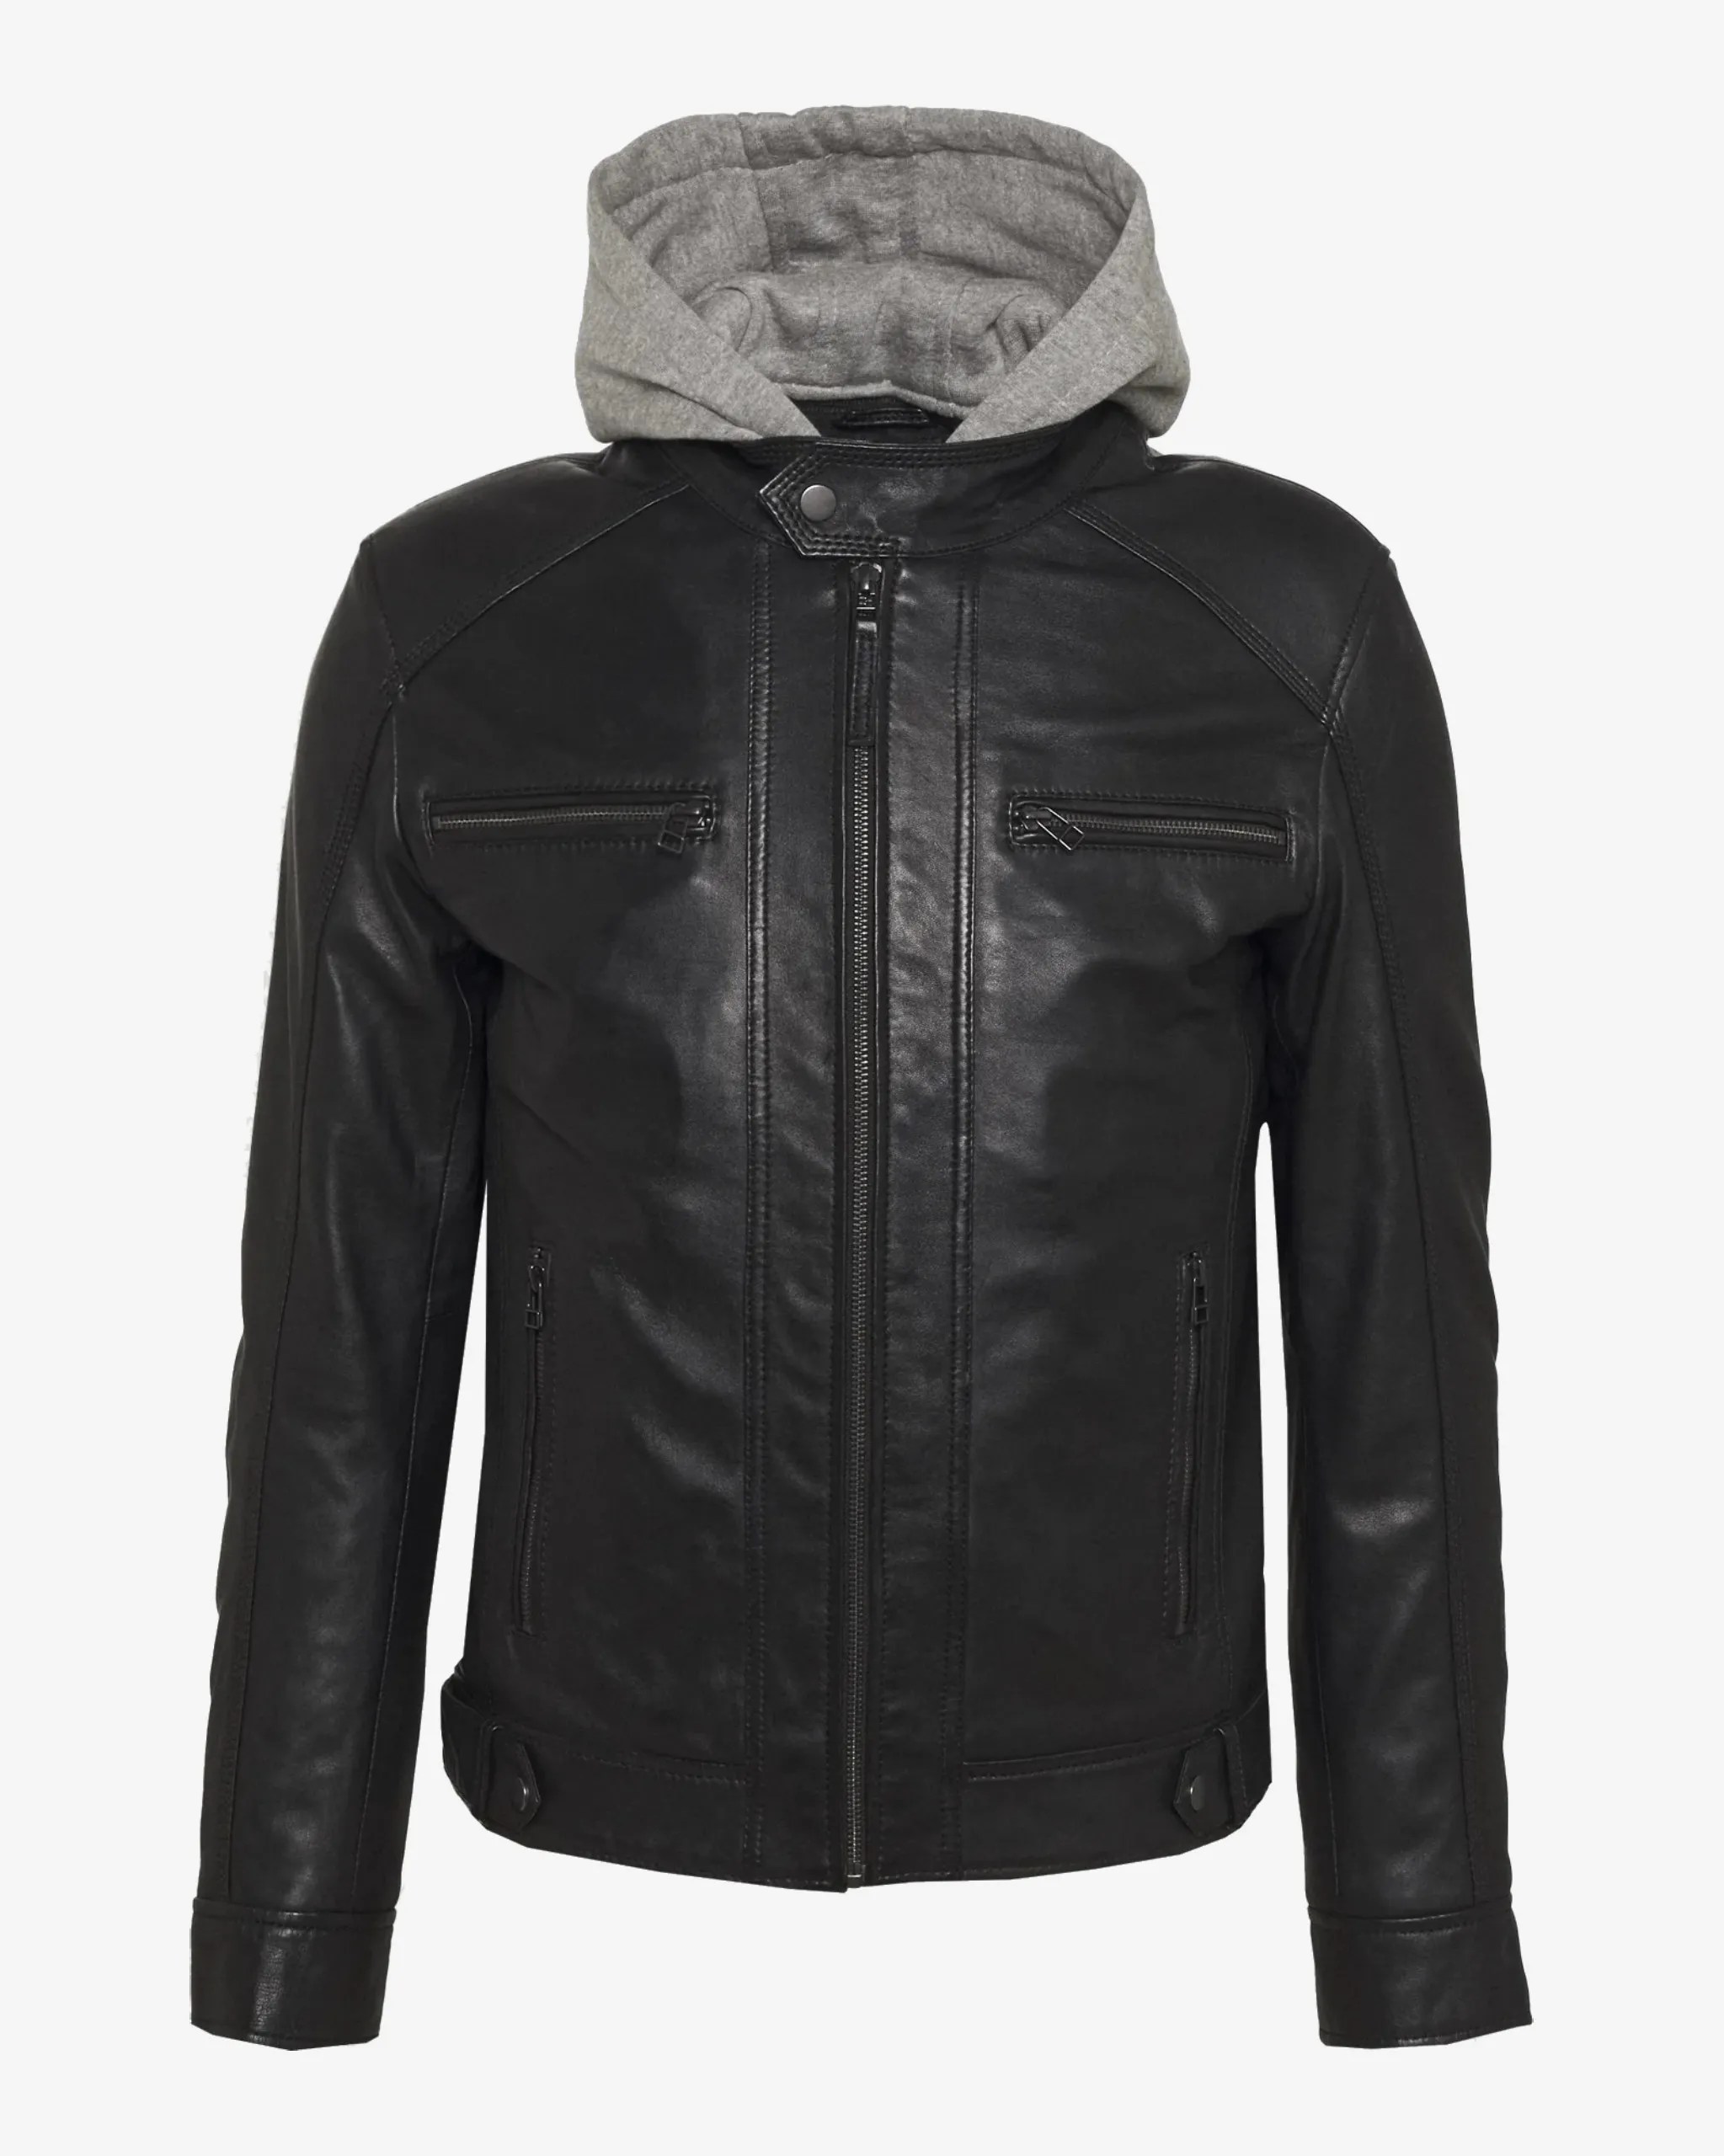 black-hooded-leather-jacket-lambskin-polyester-lining (7)